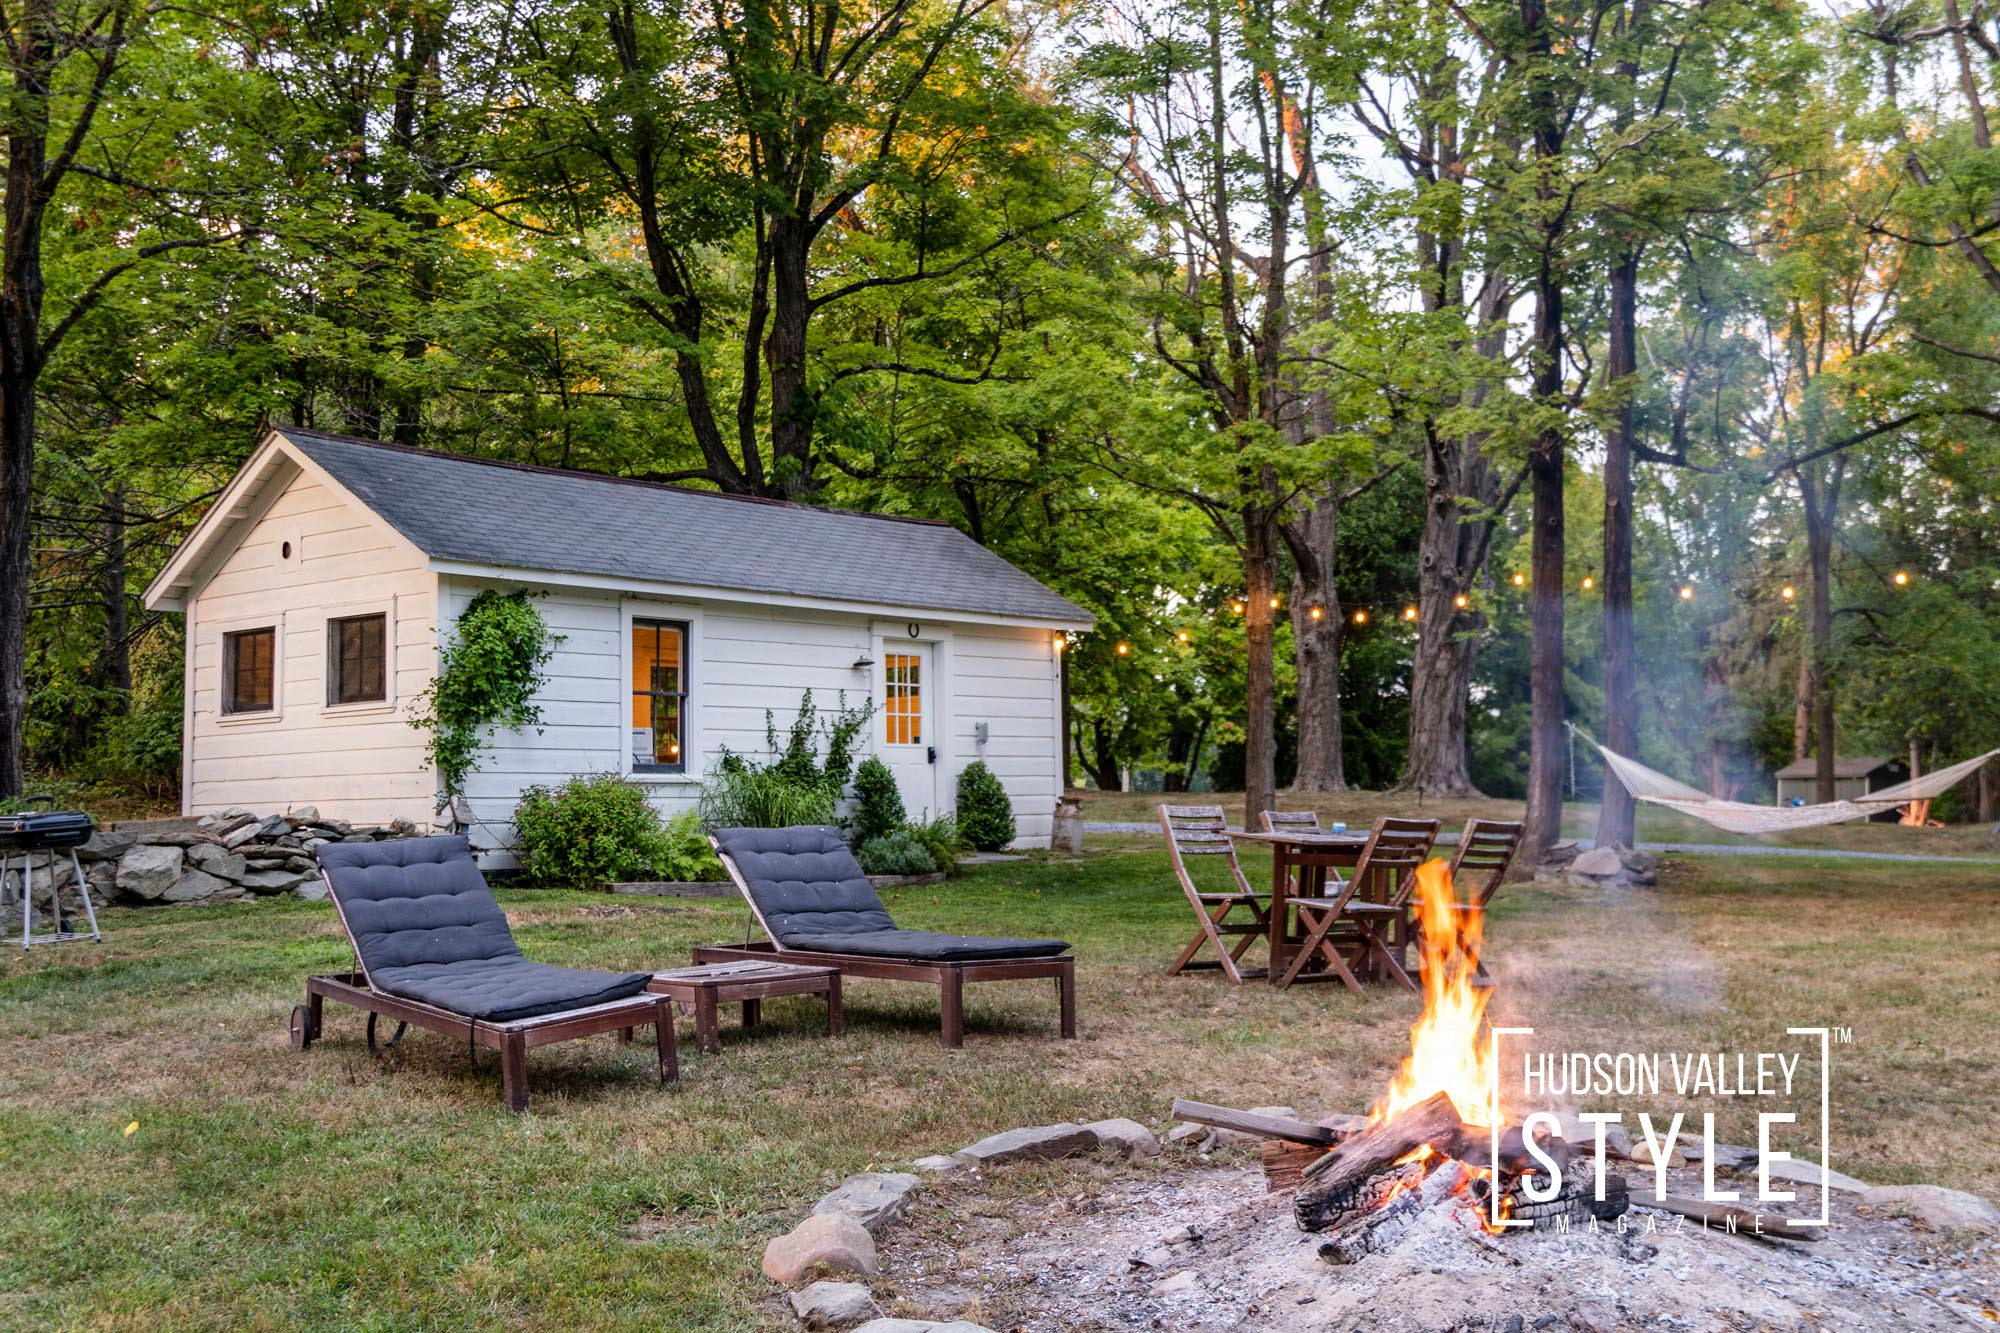 Spend a Weekend in a Charming Tiny Cottage on a Farm in the Hudson Valley – Airbnb Review by Photographer Maxwell Alexander / Alluvion Media